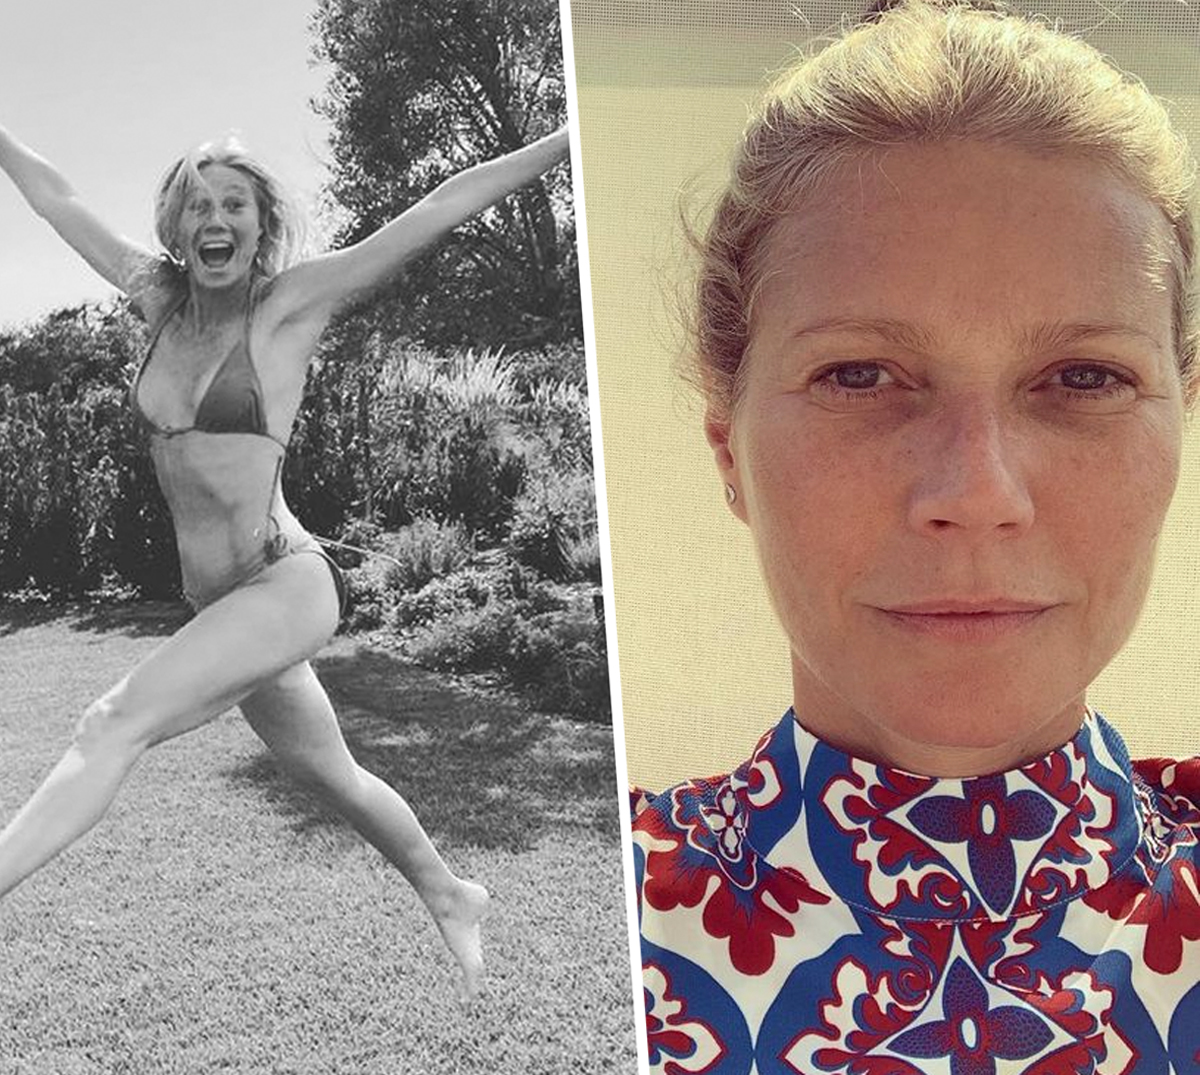 #Gwyneth Paltrow Pens Powerful Message On Embracing Aging Ahead Of Her 50th Birthday